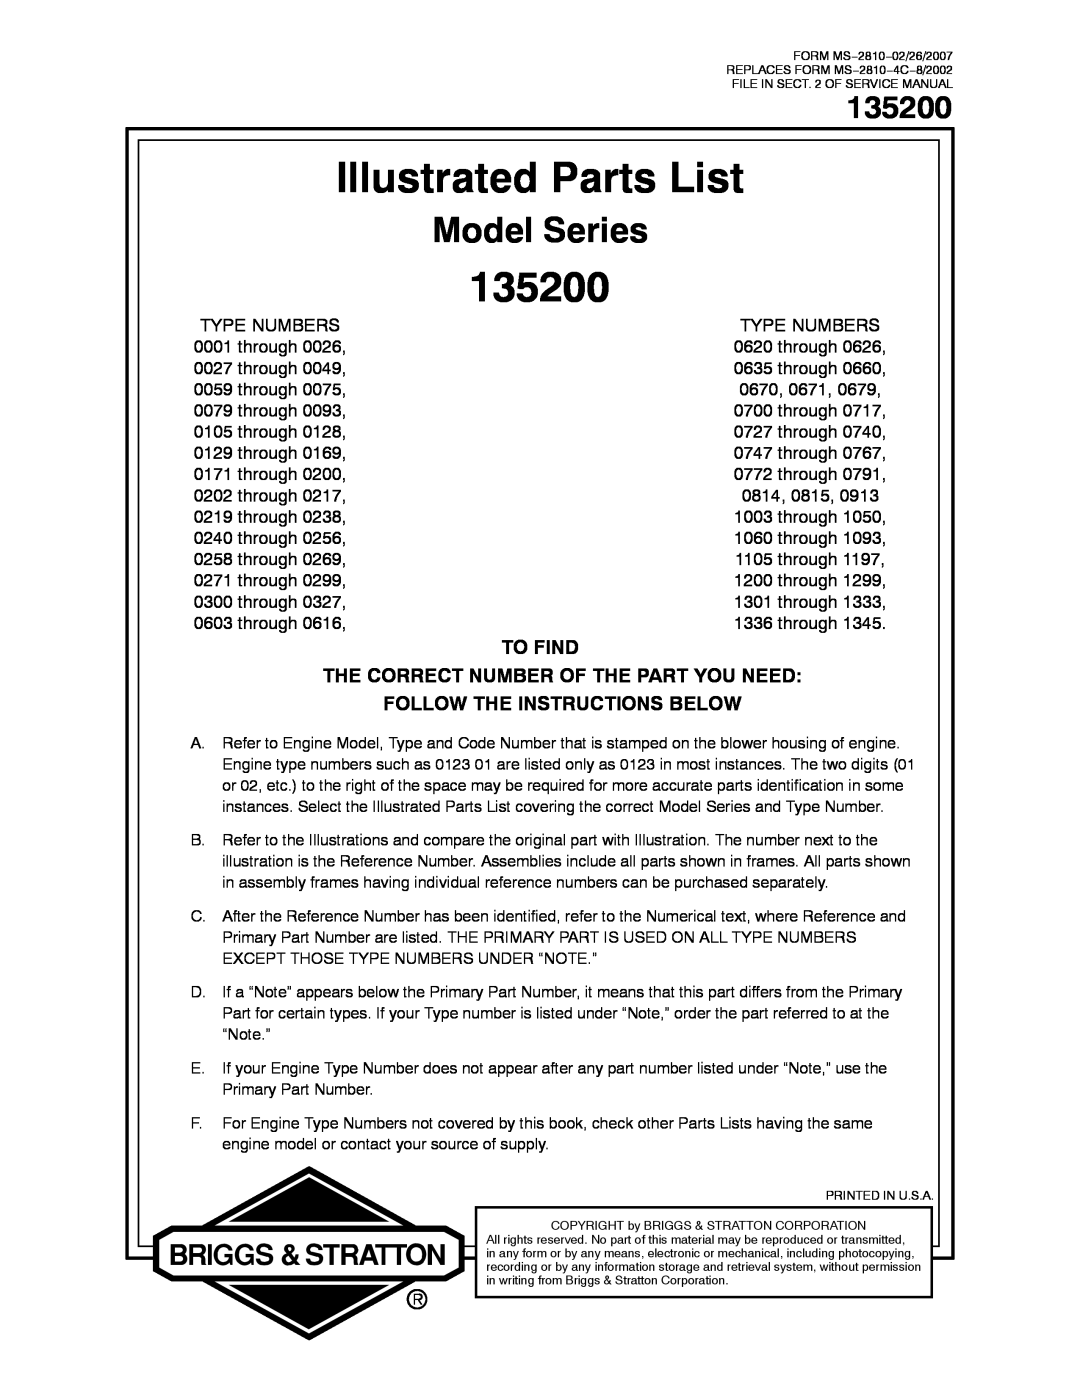 Briggs & Stratton 135200 service manual Illustrated Parts List, Model Series, Follow The Instructions Below 